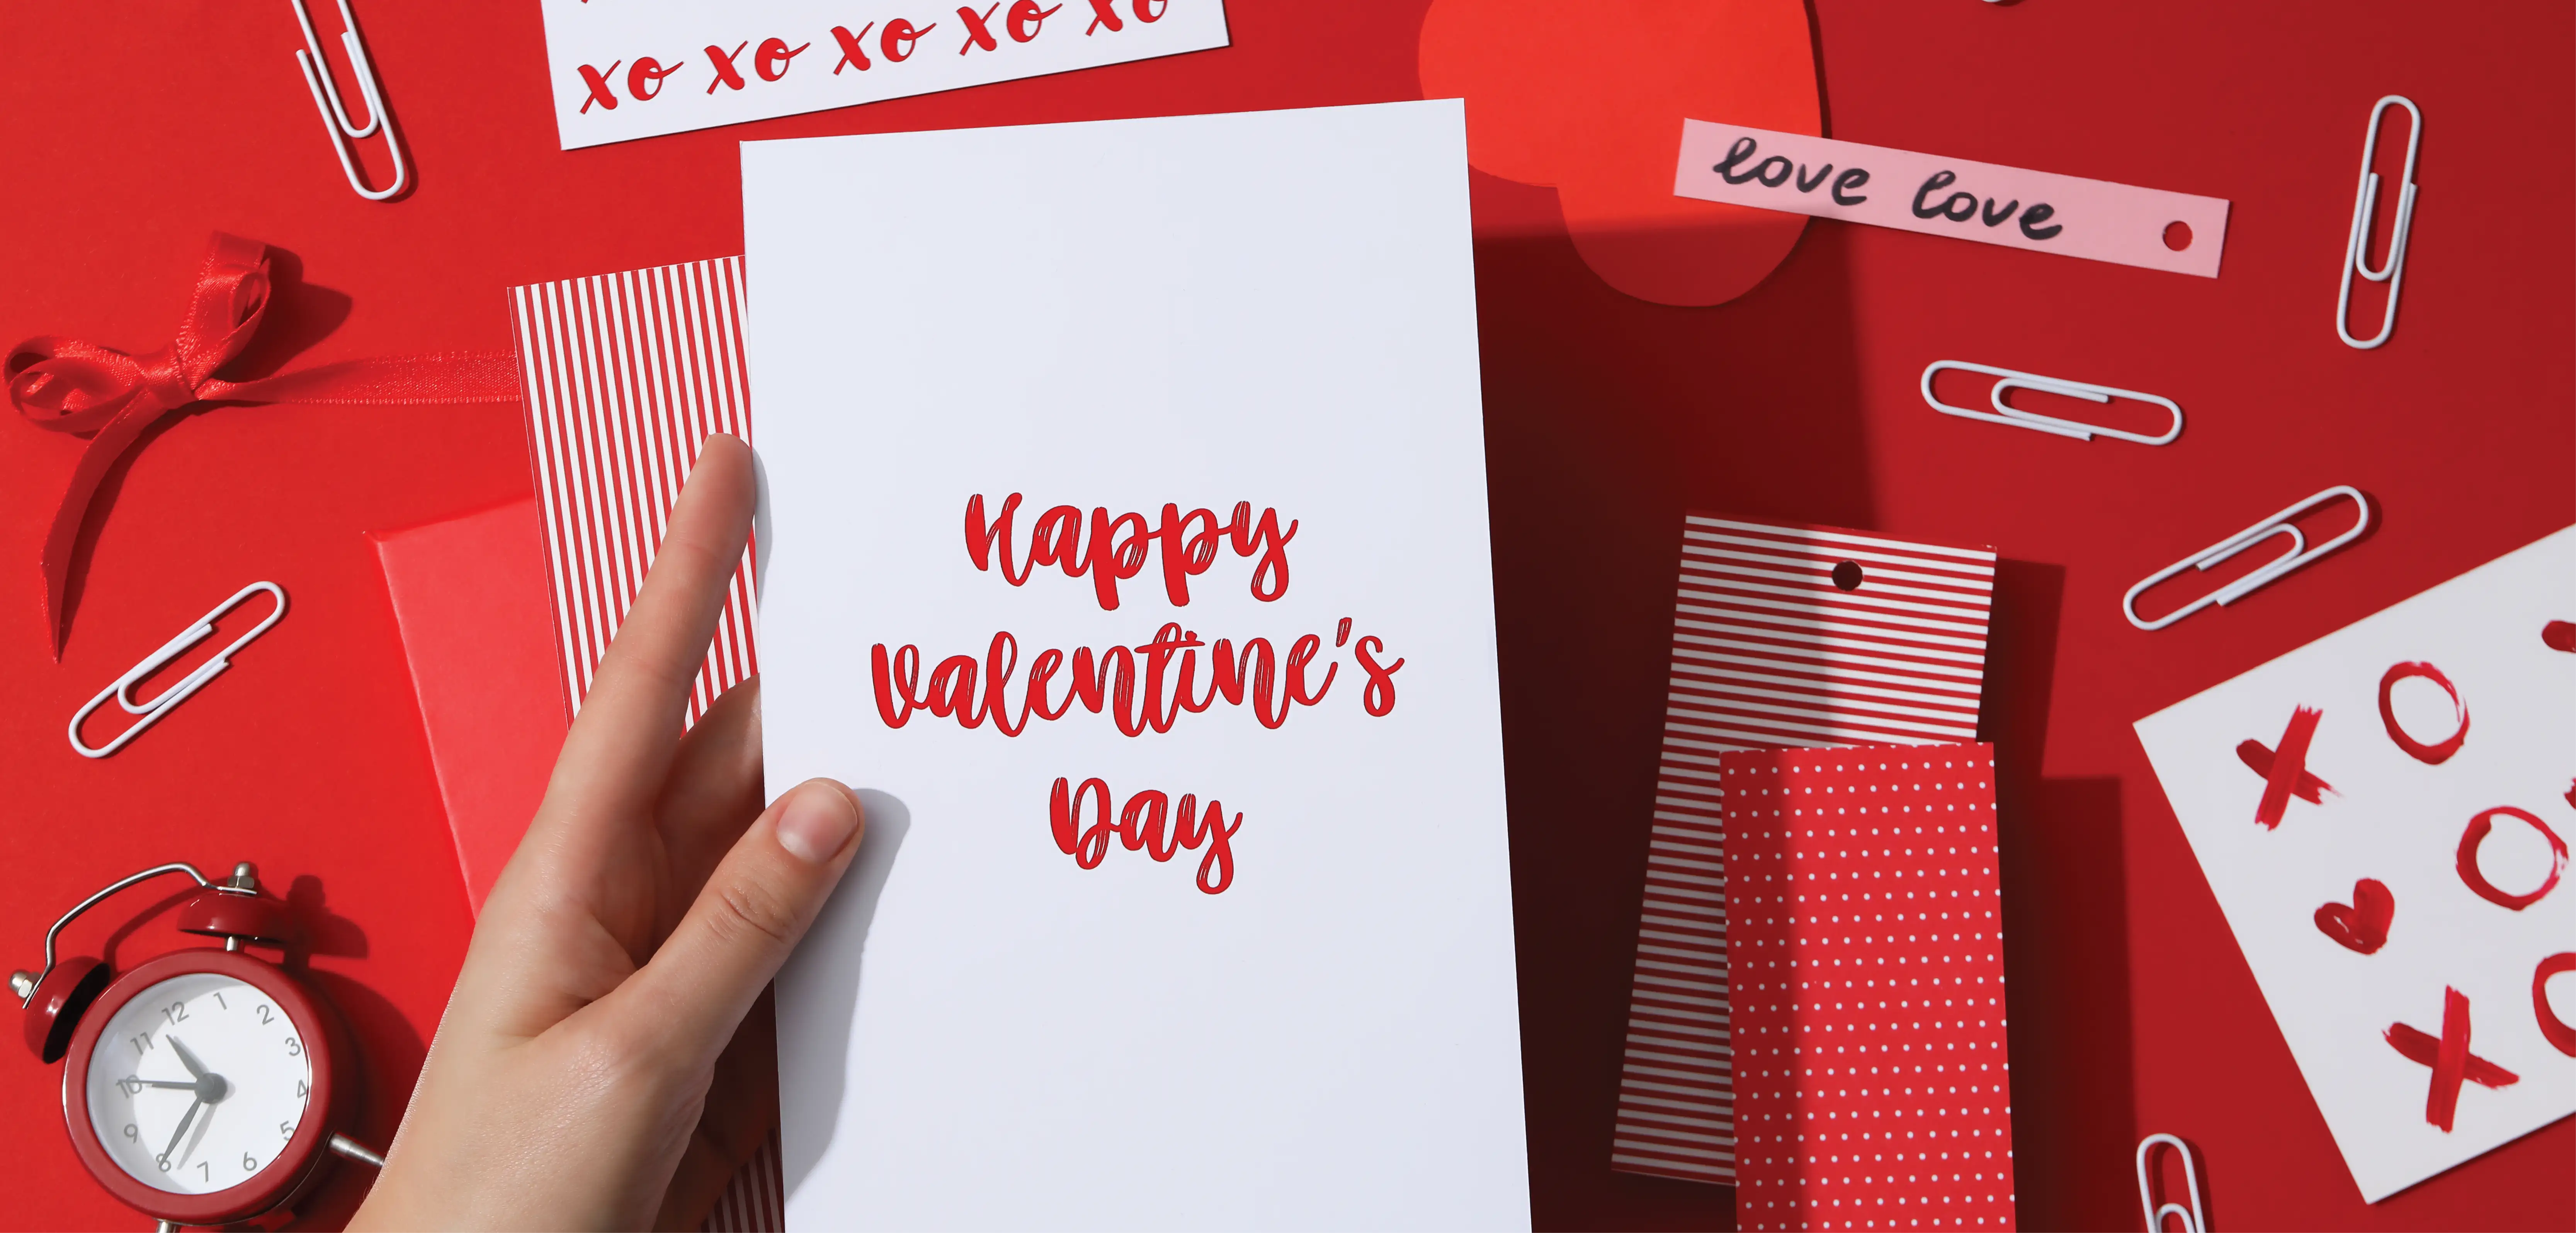 A hand holds a card that says Happy Valentine's Day above a red table scattered with paperclips and papers saying XOXO and love